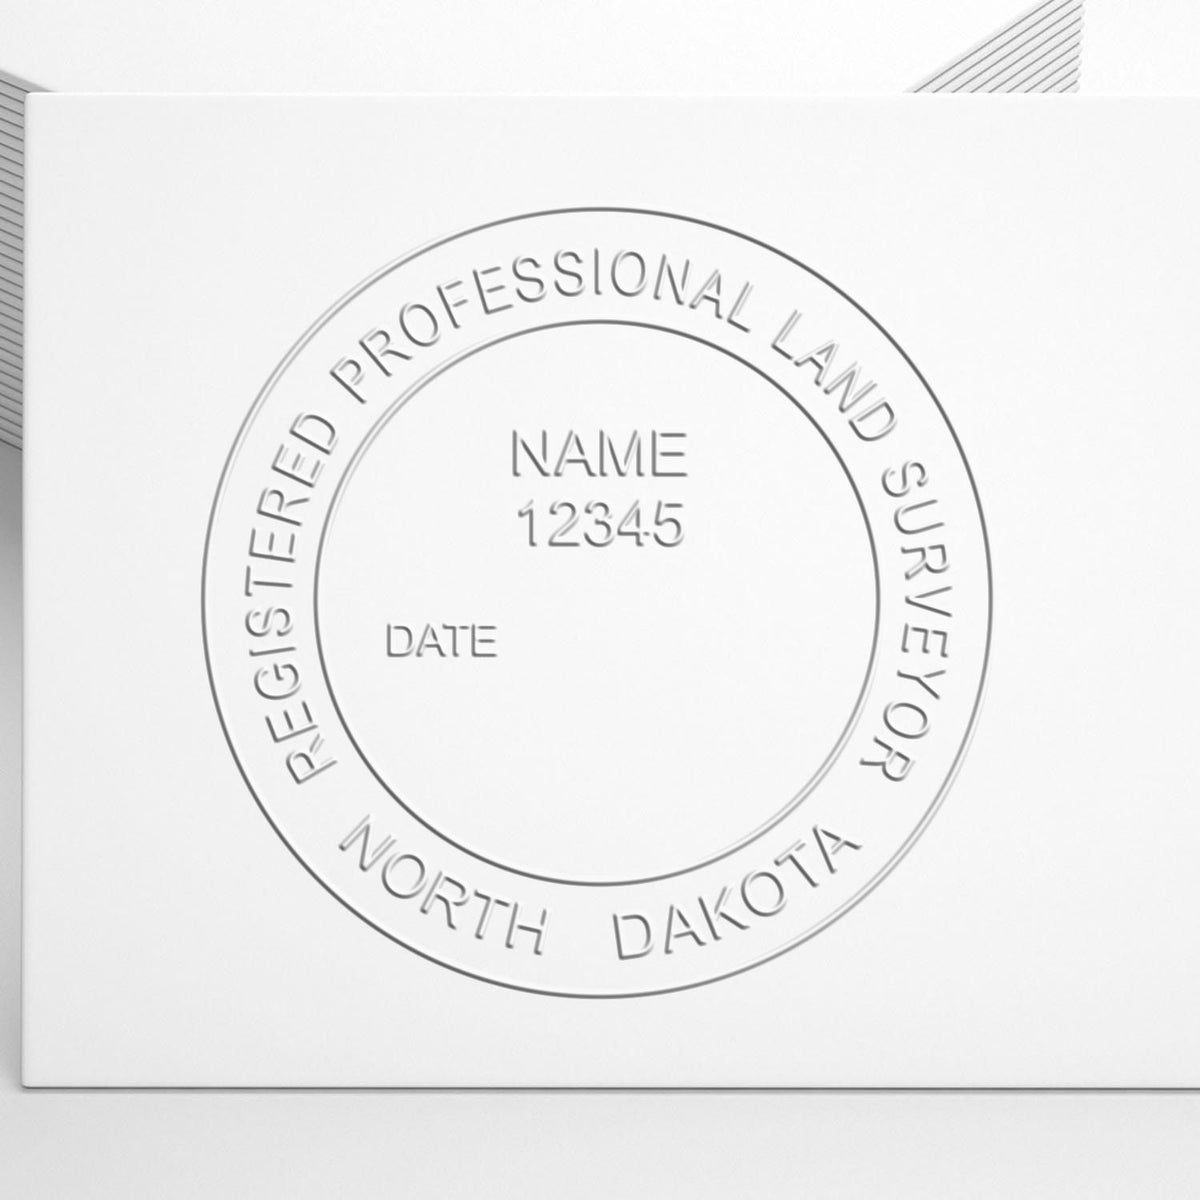 The Gift North Dakota Land Surveyor Seal stamp impression comes to life with a crisp, detailed image stamped on paper - showcasing true professional quality.